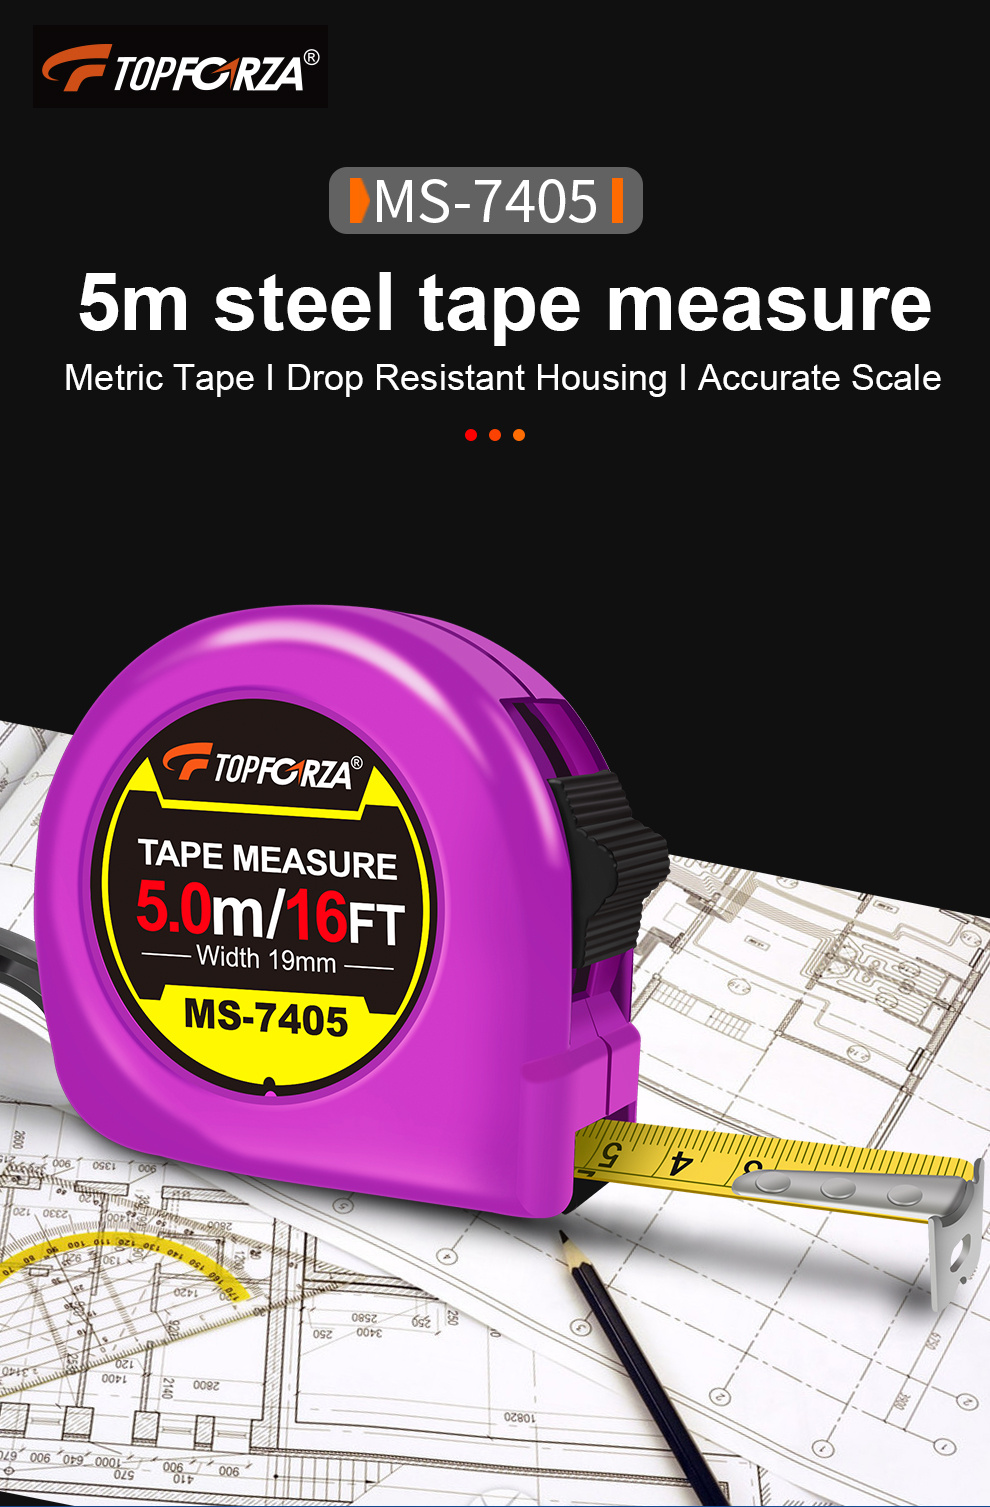 1pc 1.64ft Tape Measure, Self-locking Steel Retractable Ruler, Magnetic  Claw Tip Measuring Tape